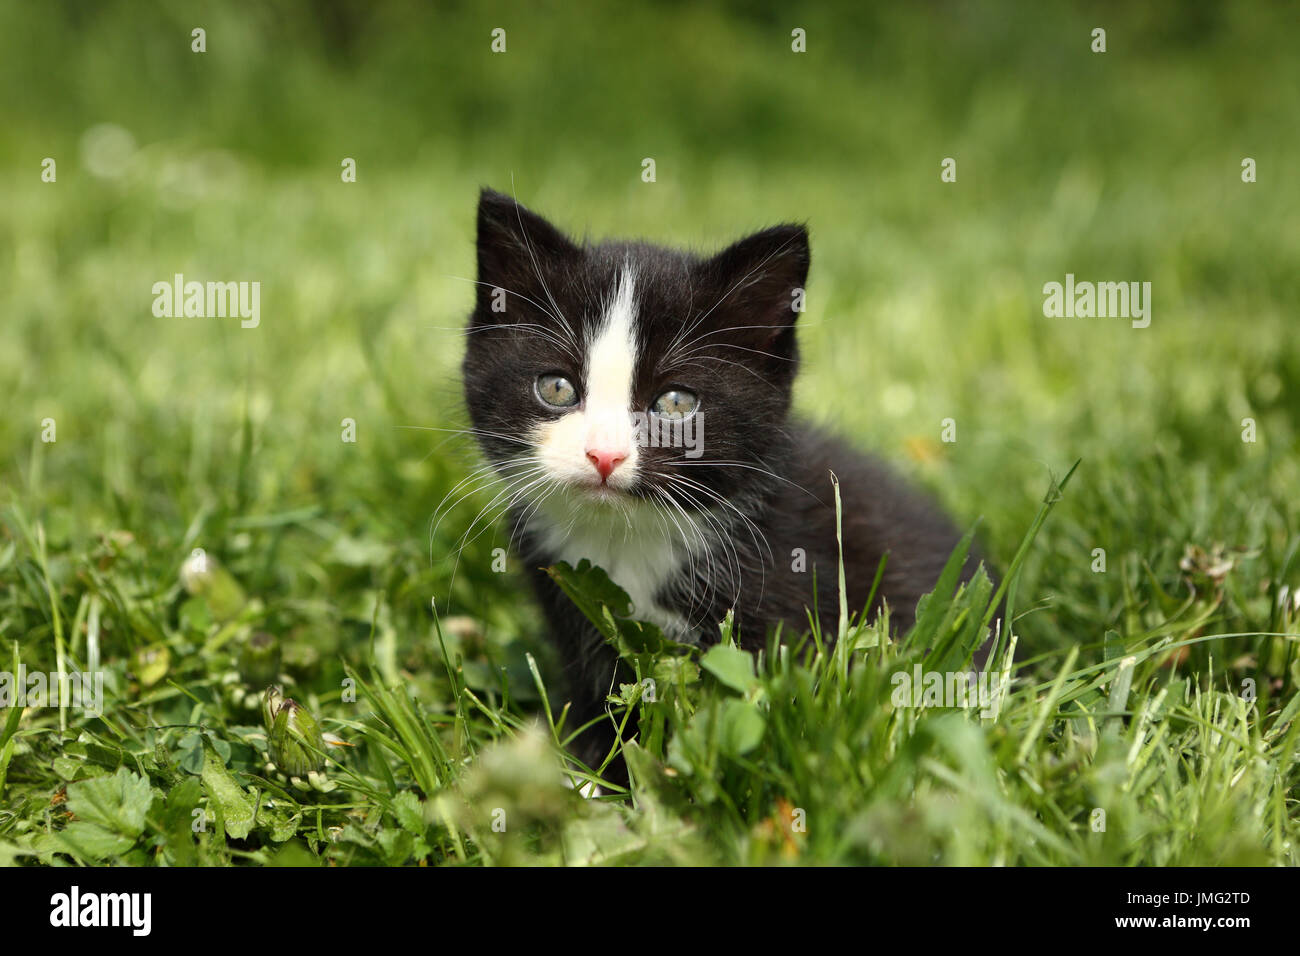 Domestic cat. Black-and-white kitten (6 weeks old) sitting in grass. Germany Stock Photo